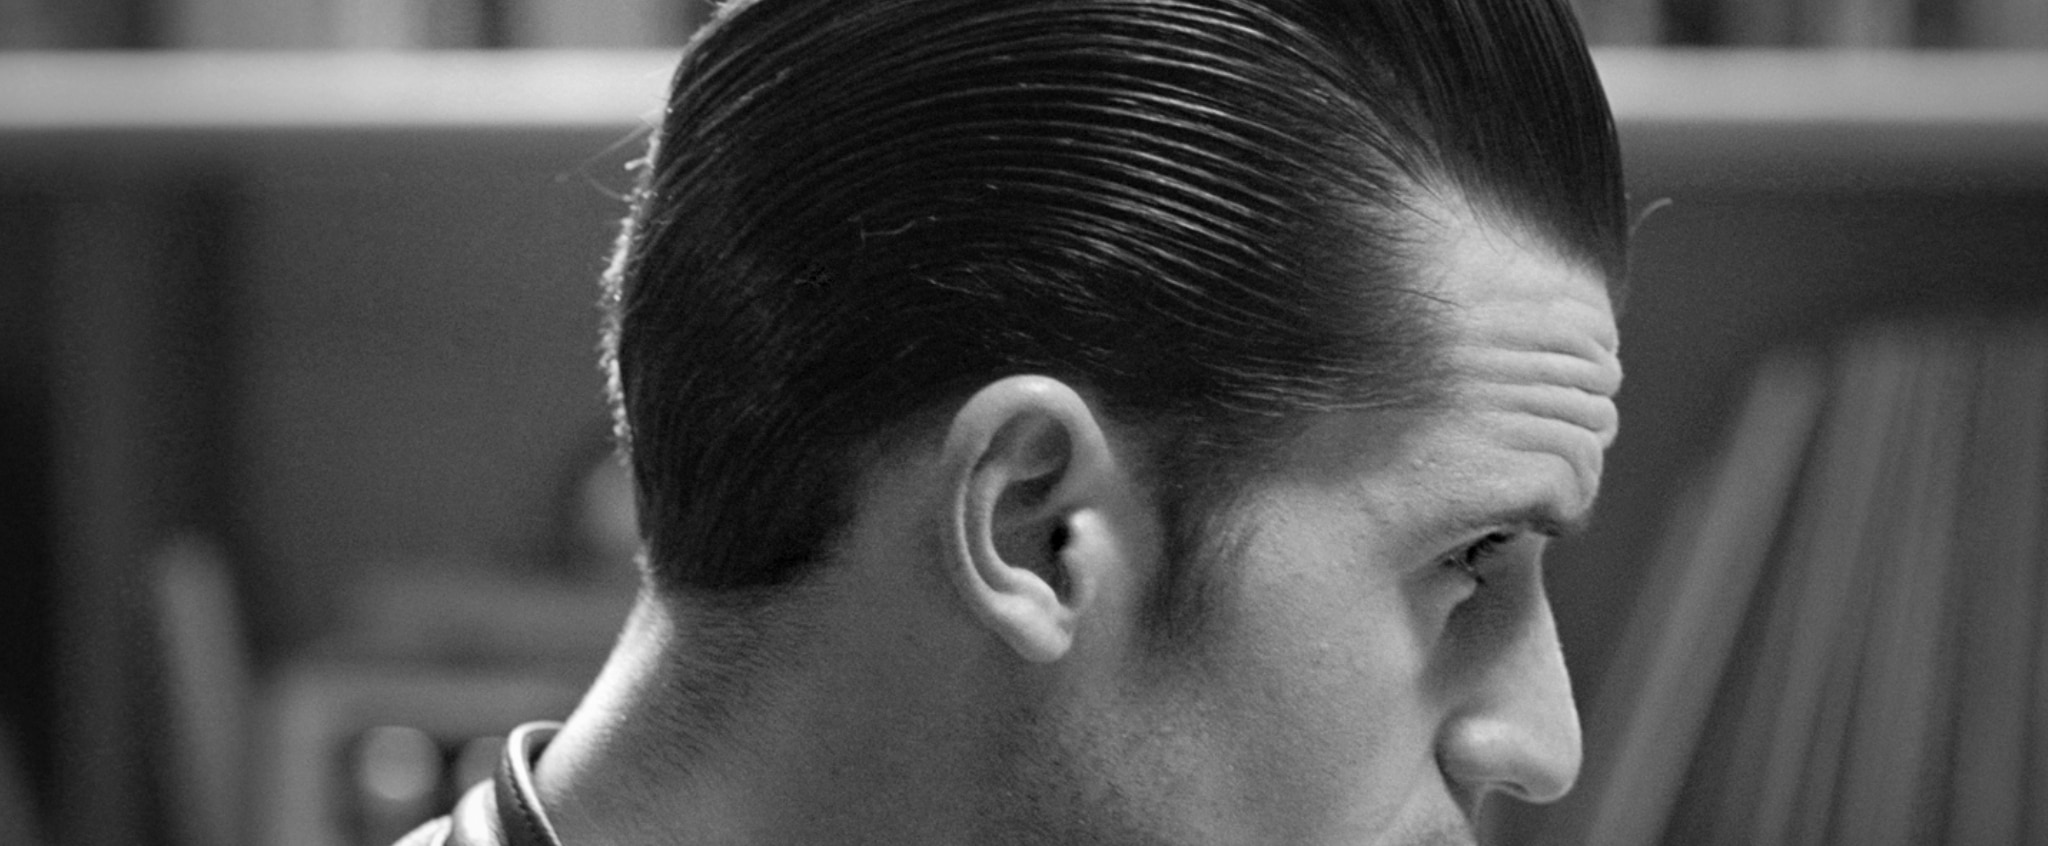 Want to know how to perfect that quiff or fancy shaking up your look a bit? Whatever your style goals, we can help you achieve them.